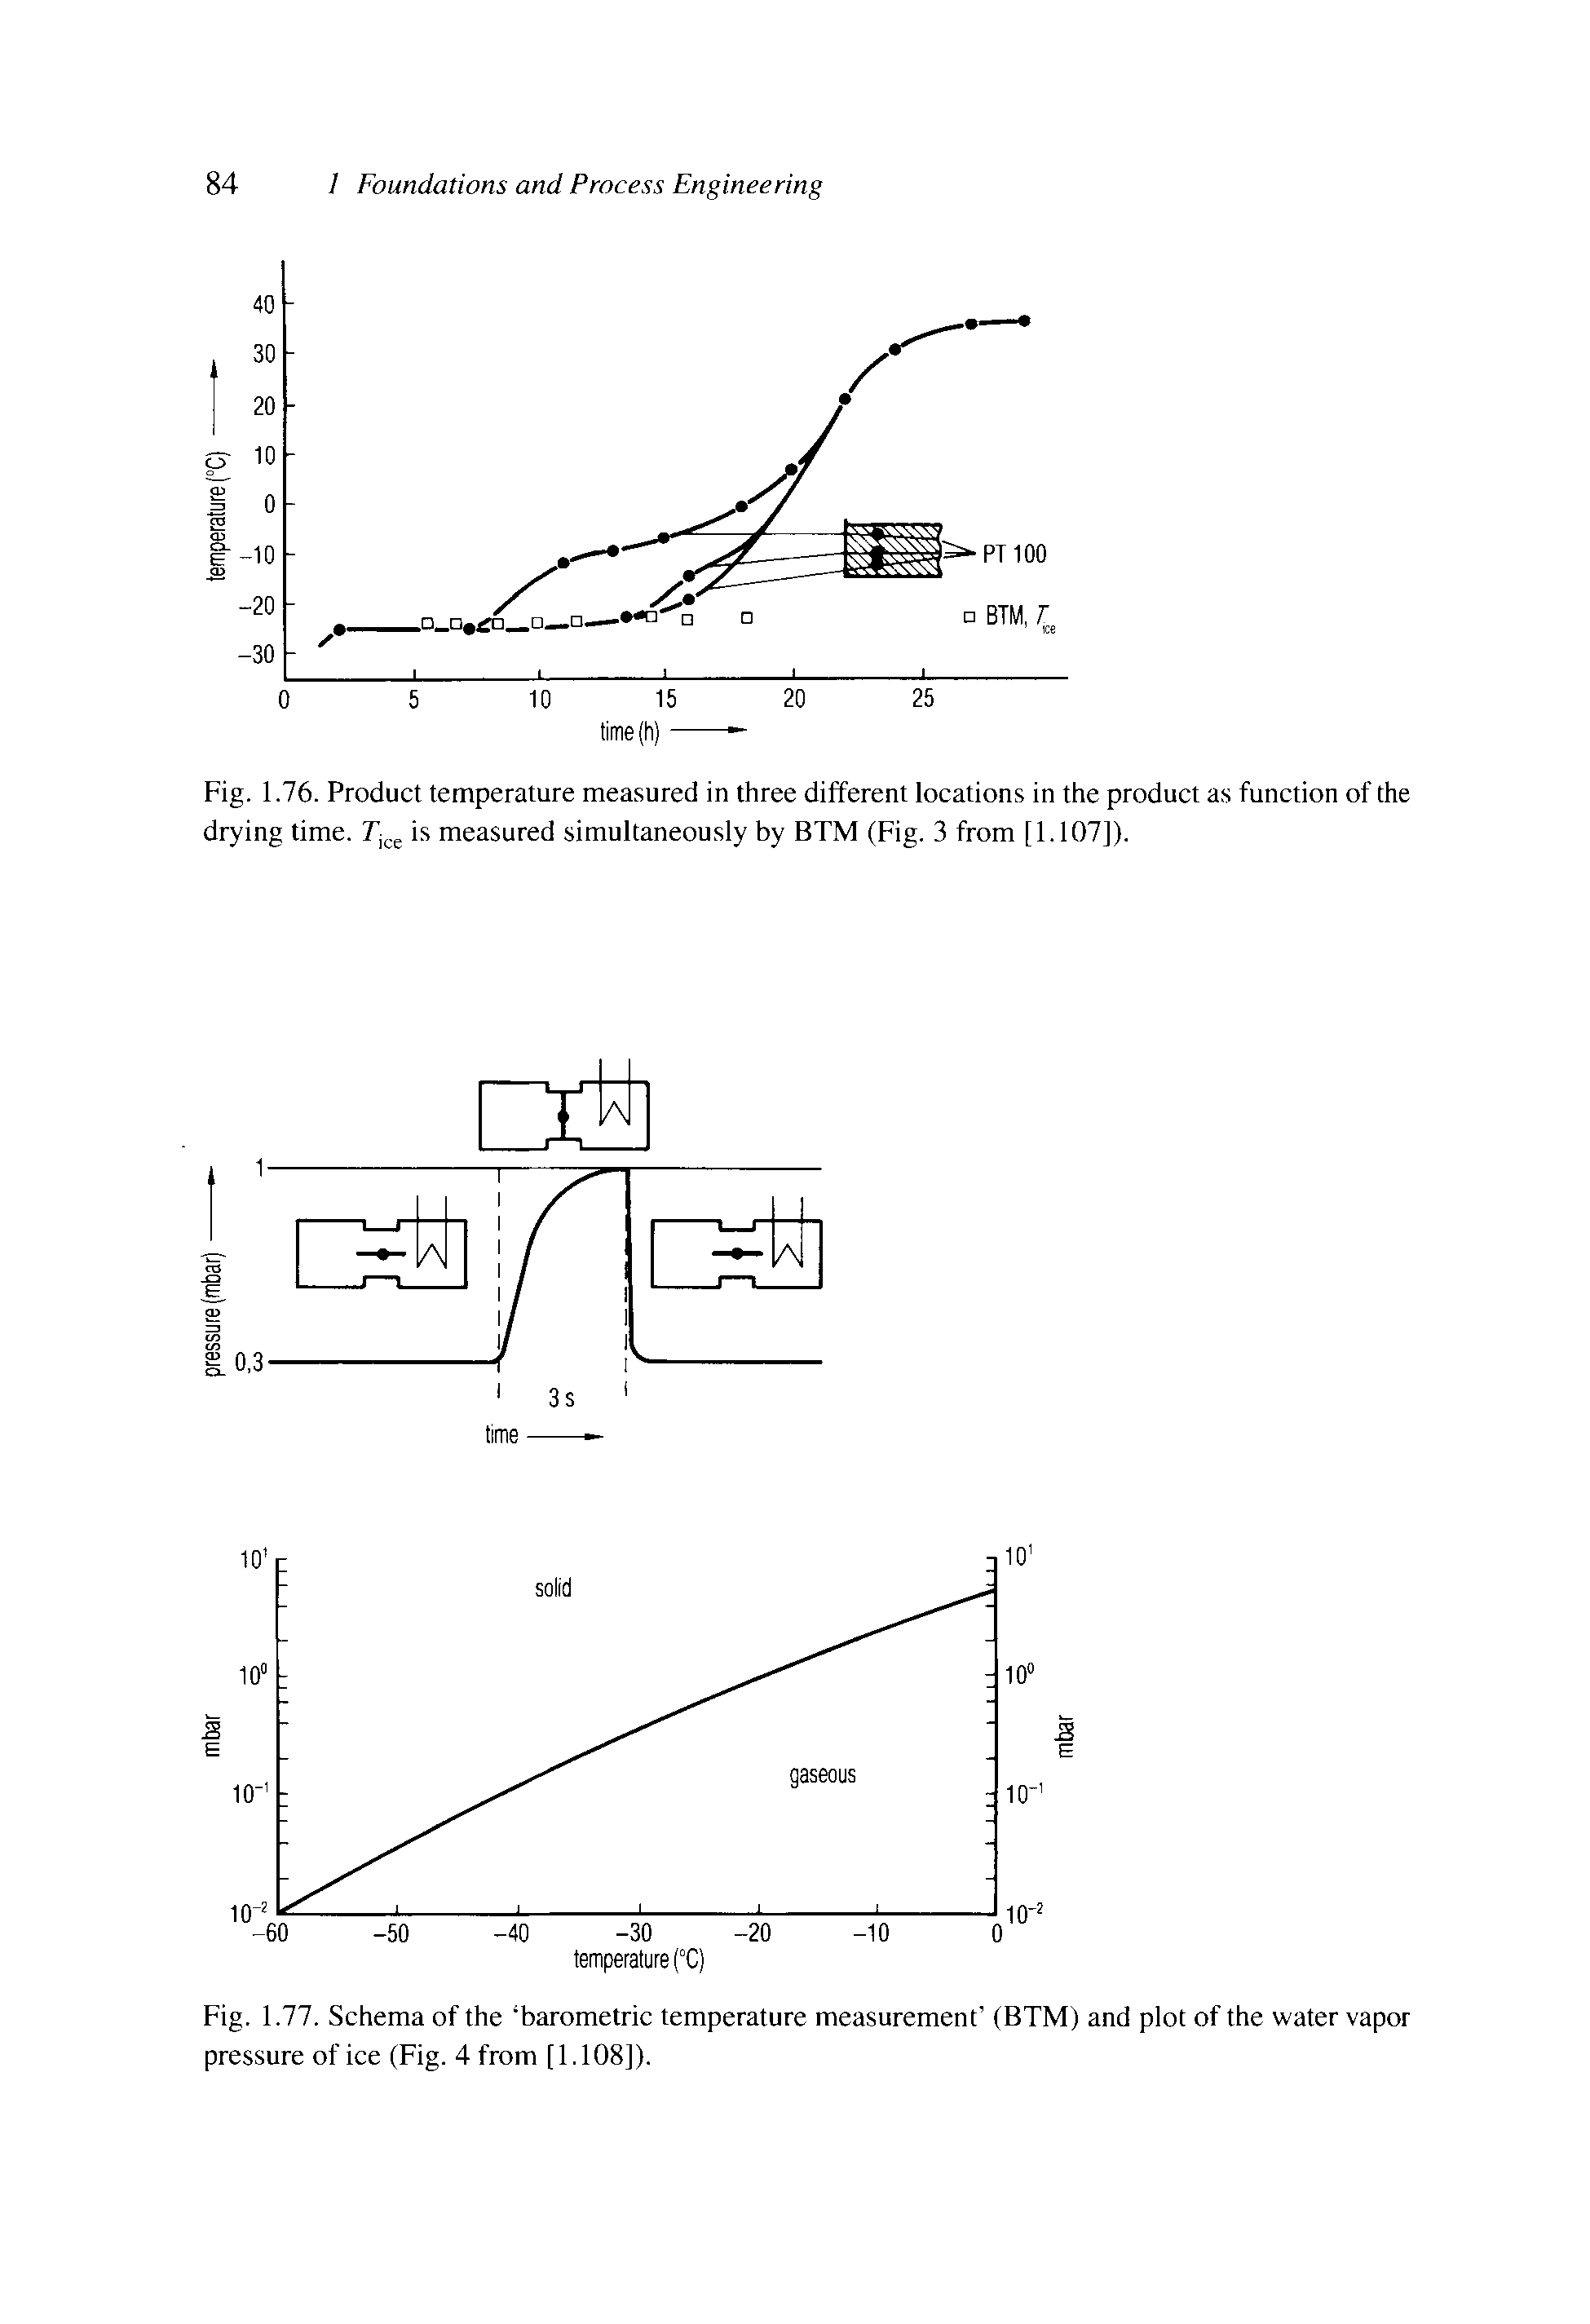 Fig. 1.76. Product temperature measured in three different locations in the product as function of the drying time. Ticc is measured simultaneously by BTM (Fig. 3 from [1.107]).